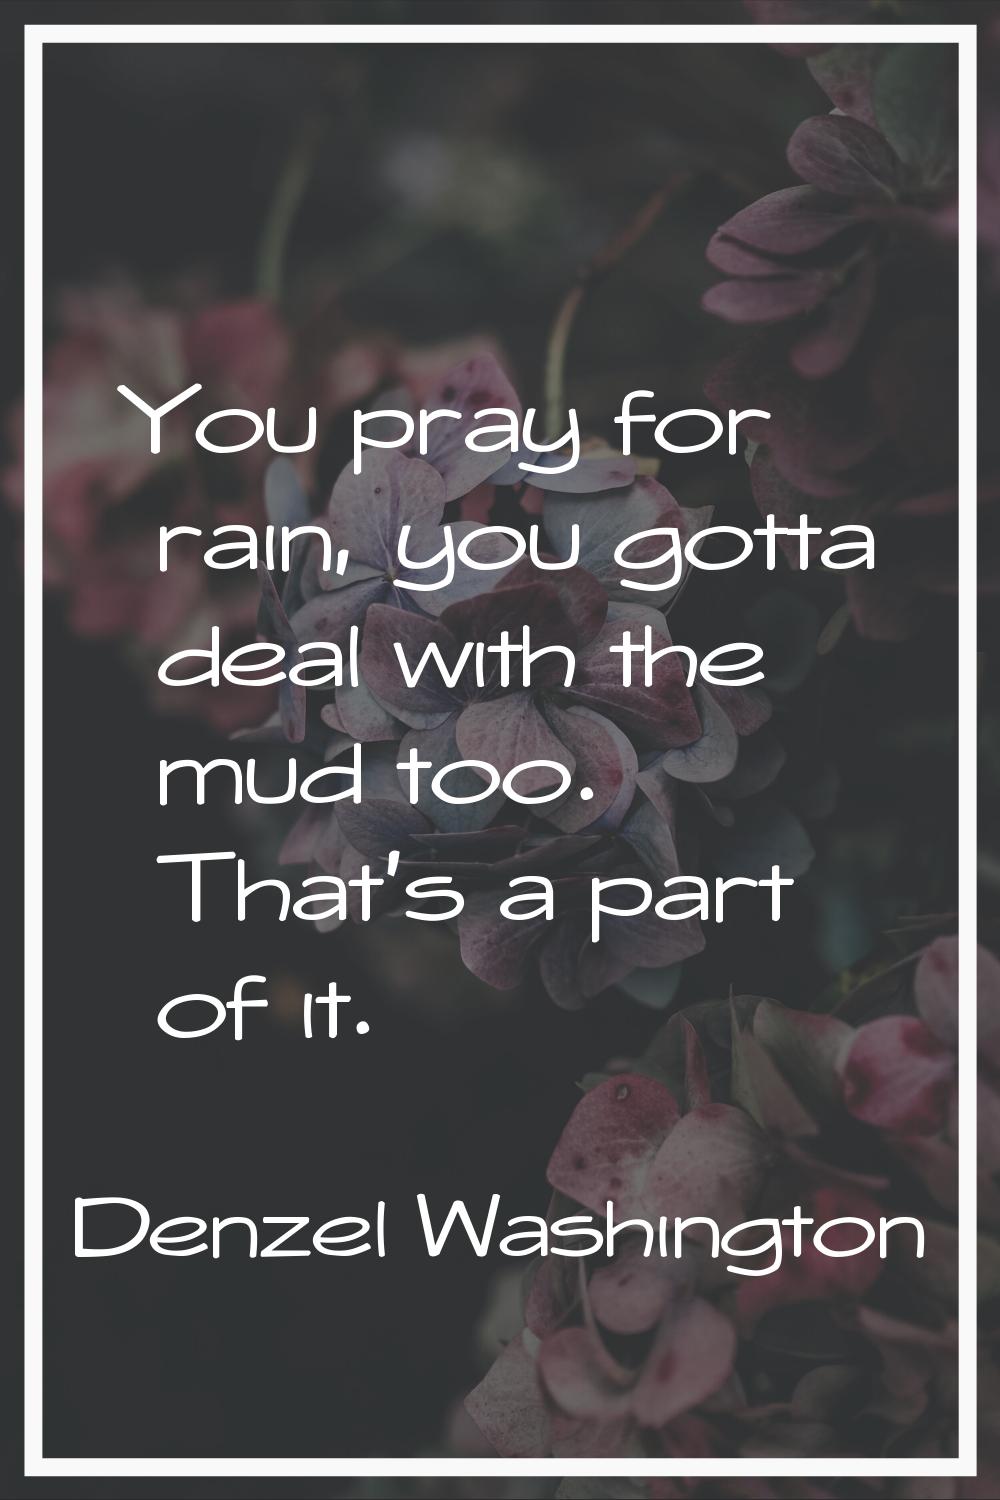 You pray for rain, you gotta deal with the mud too. That's a part of it.